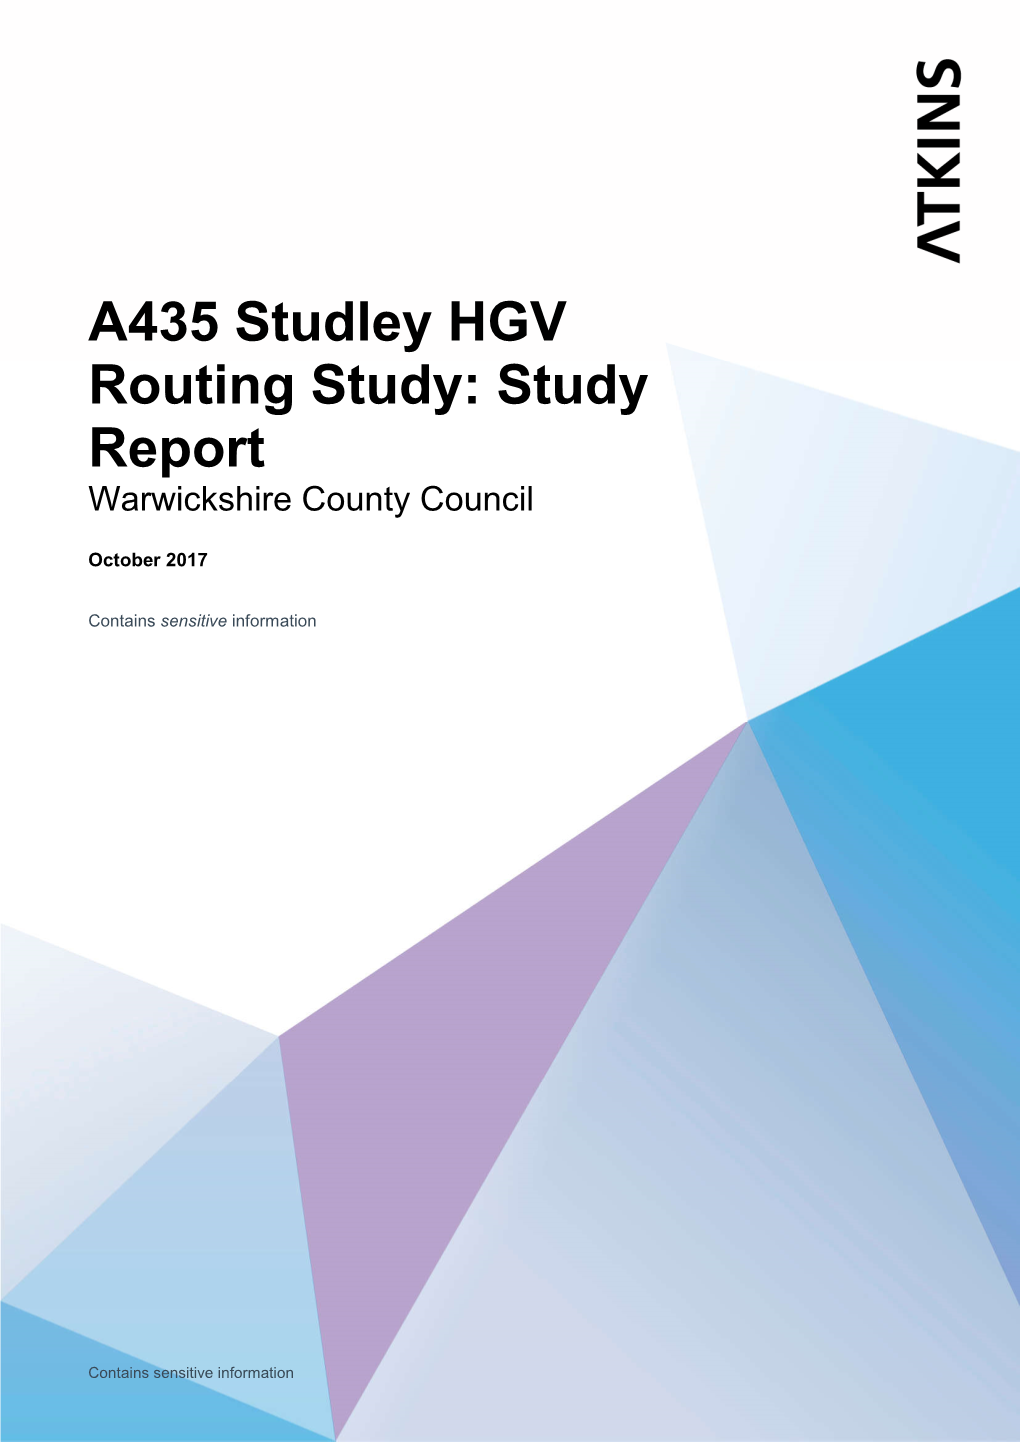 A435 Studley HGV Routing Study: Study Report Warwickshire County Council